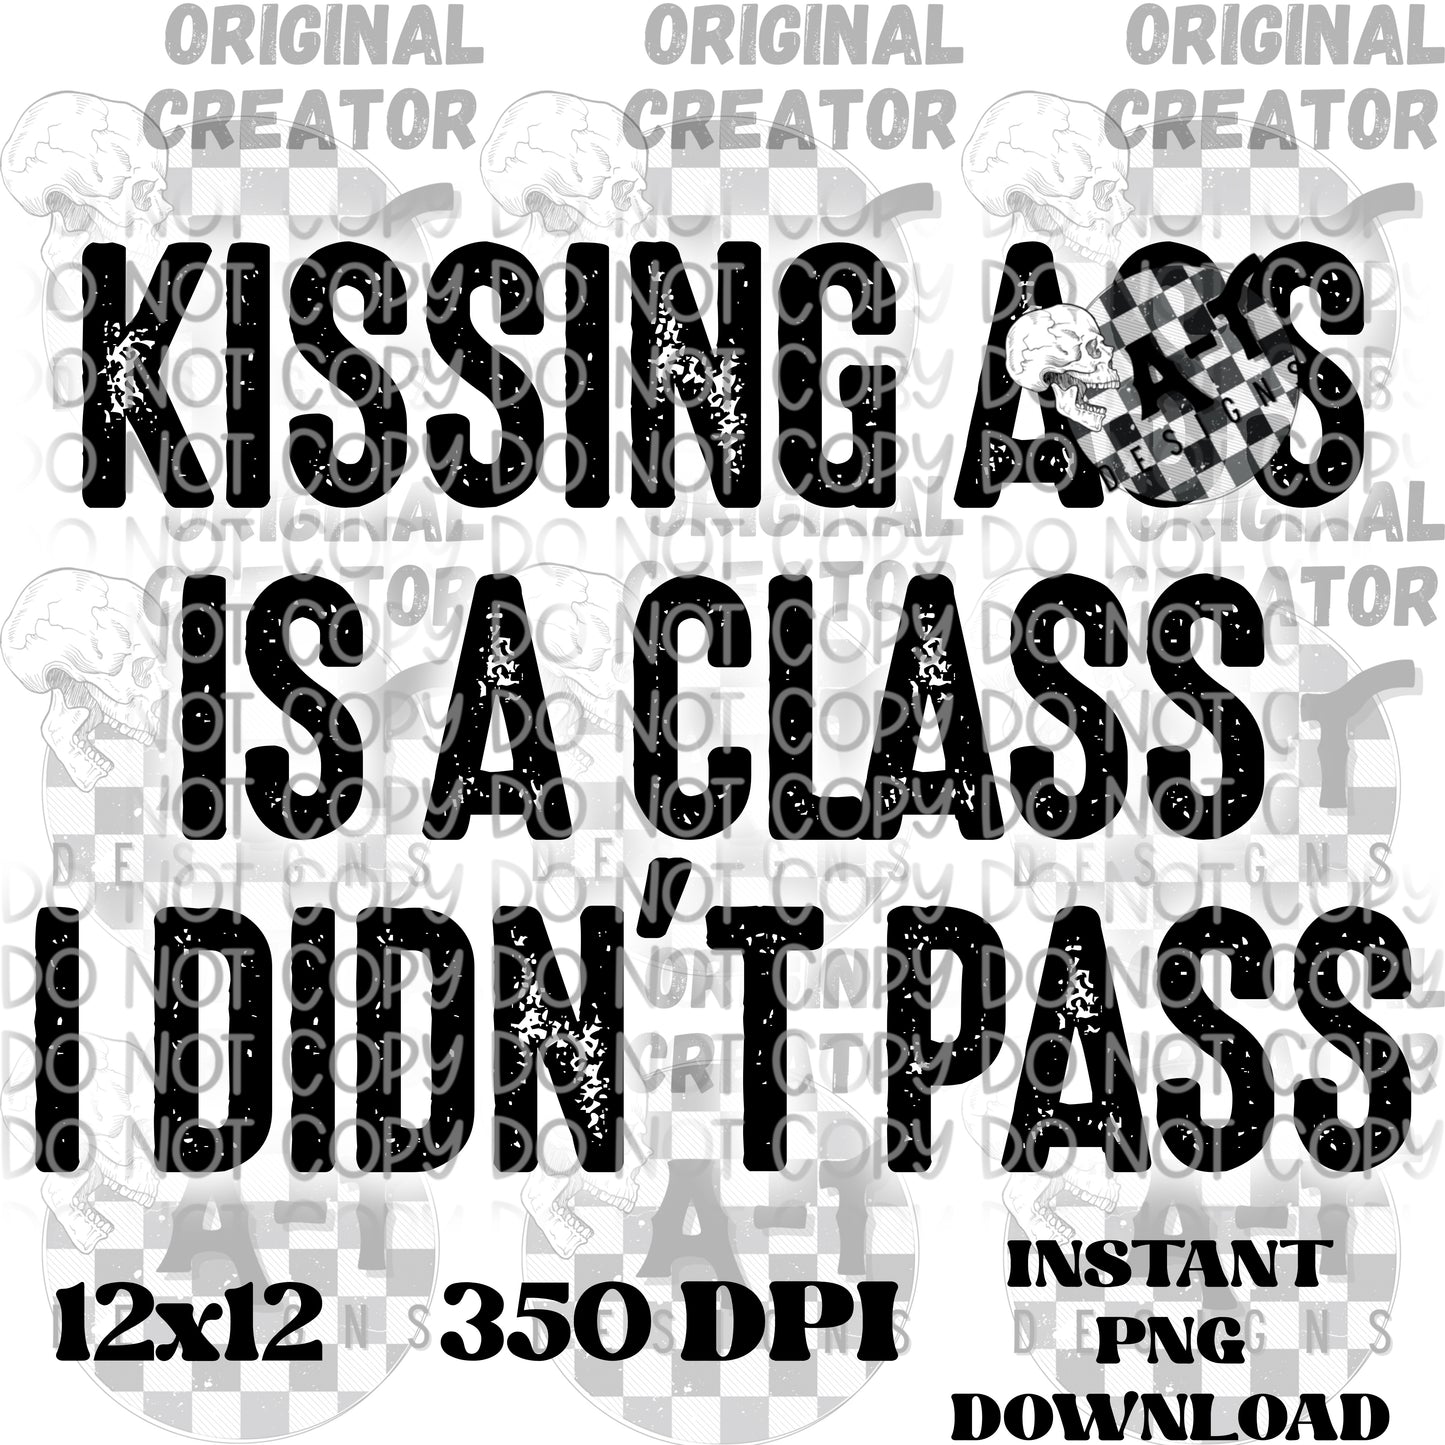 Kissing @$$ Is A Class I Didn’t Pass